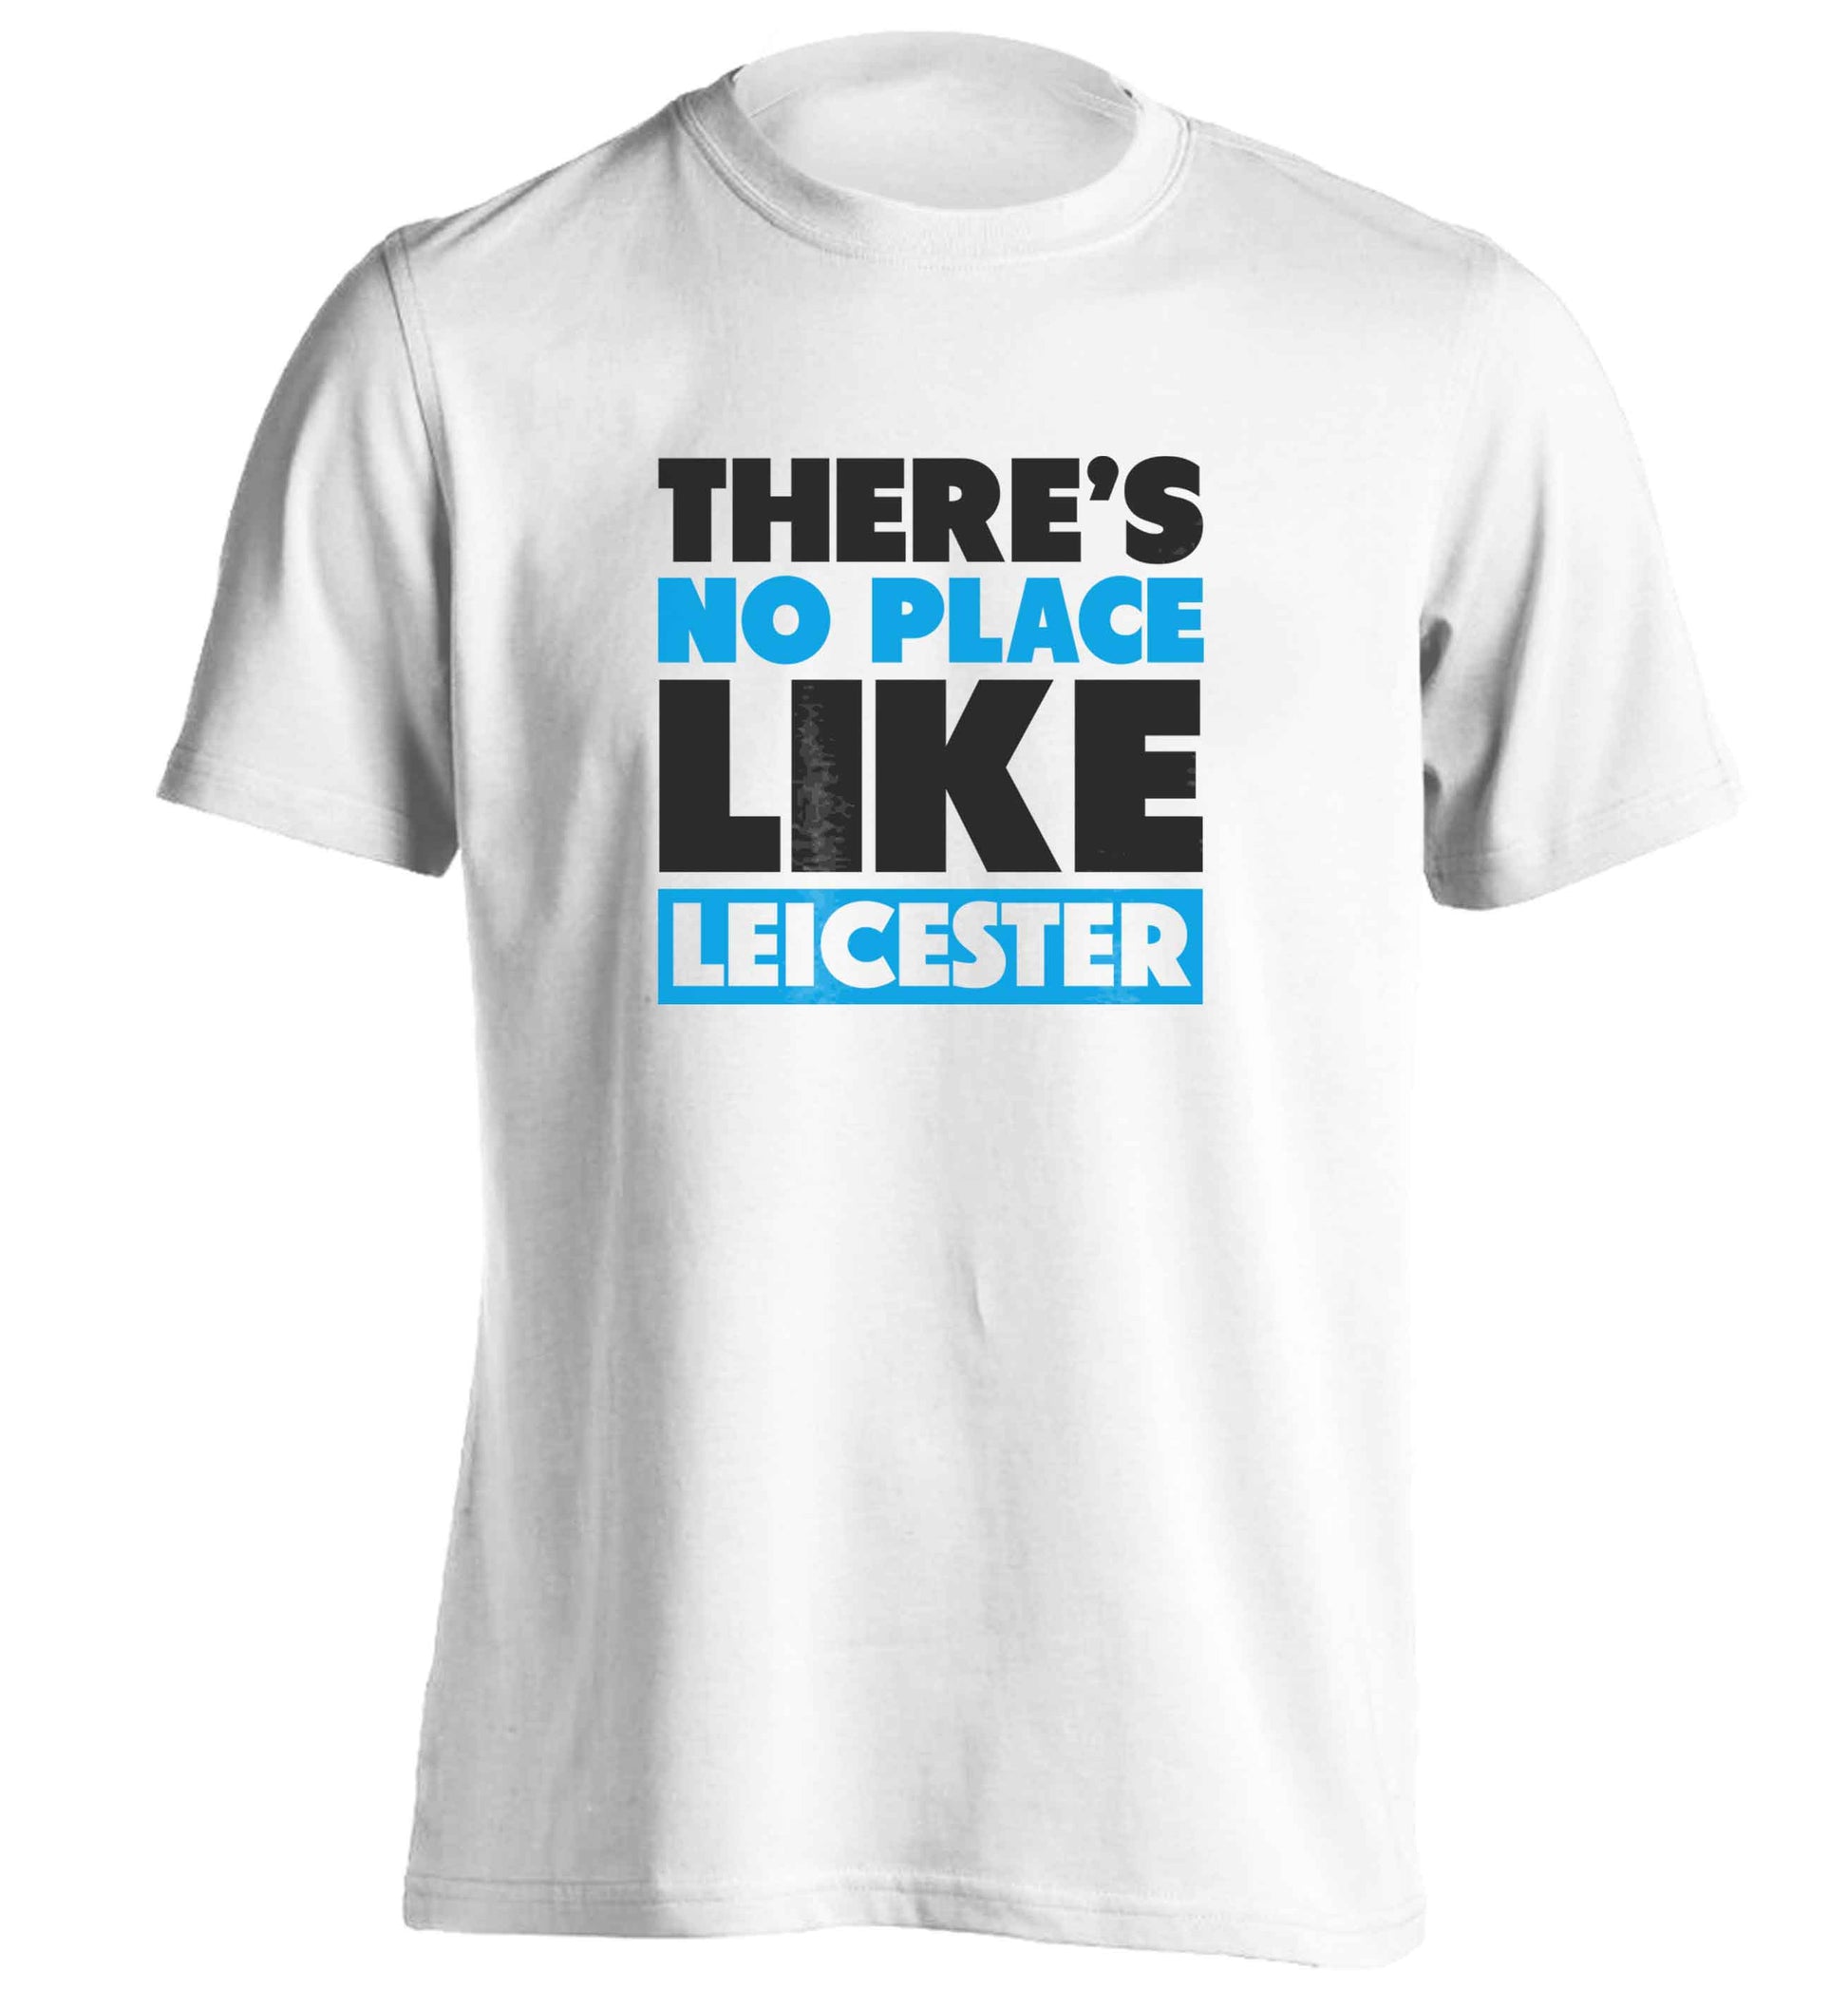 There's no place like Leicester adults unisex white Tshirt 2XL